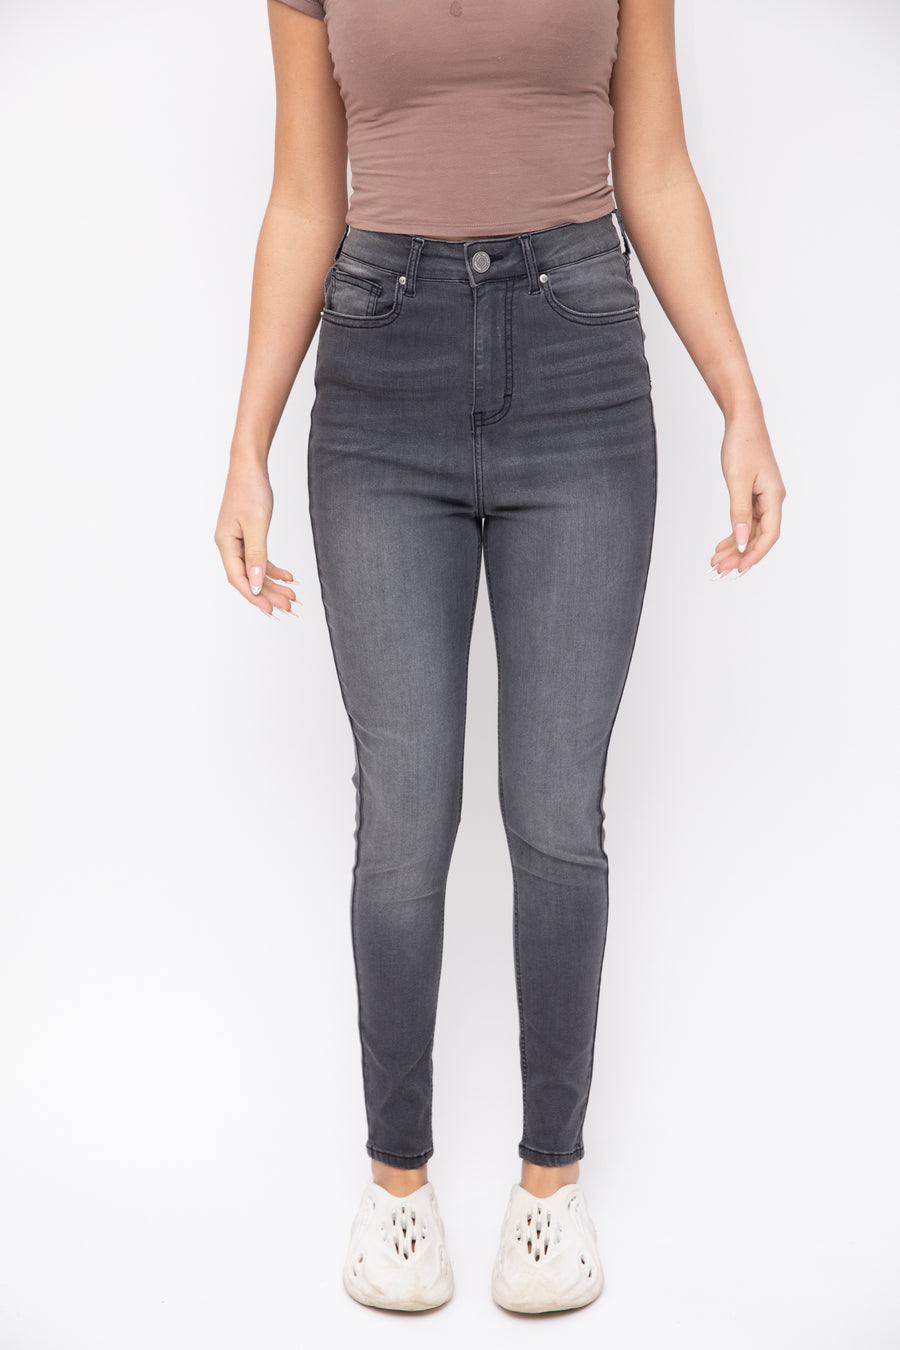 Just Organic Ava Jeans - Washed Black